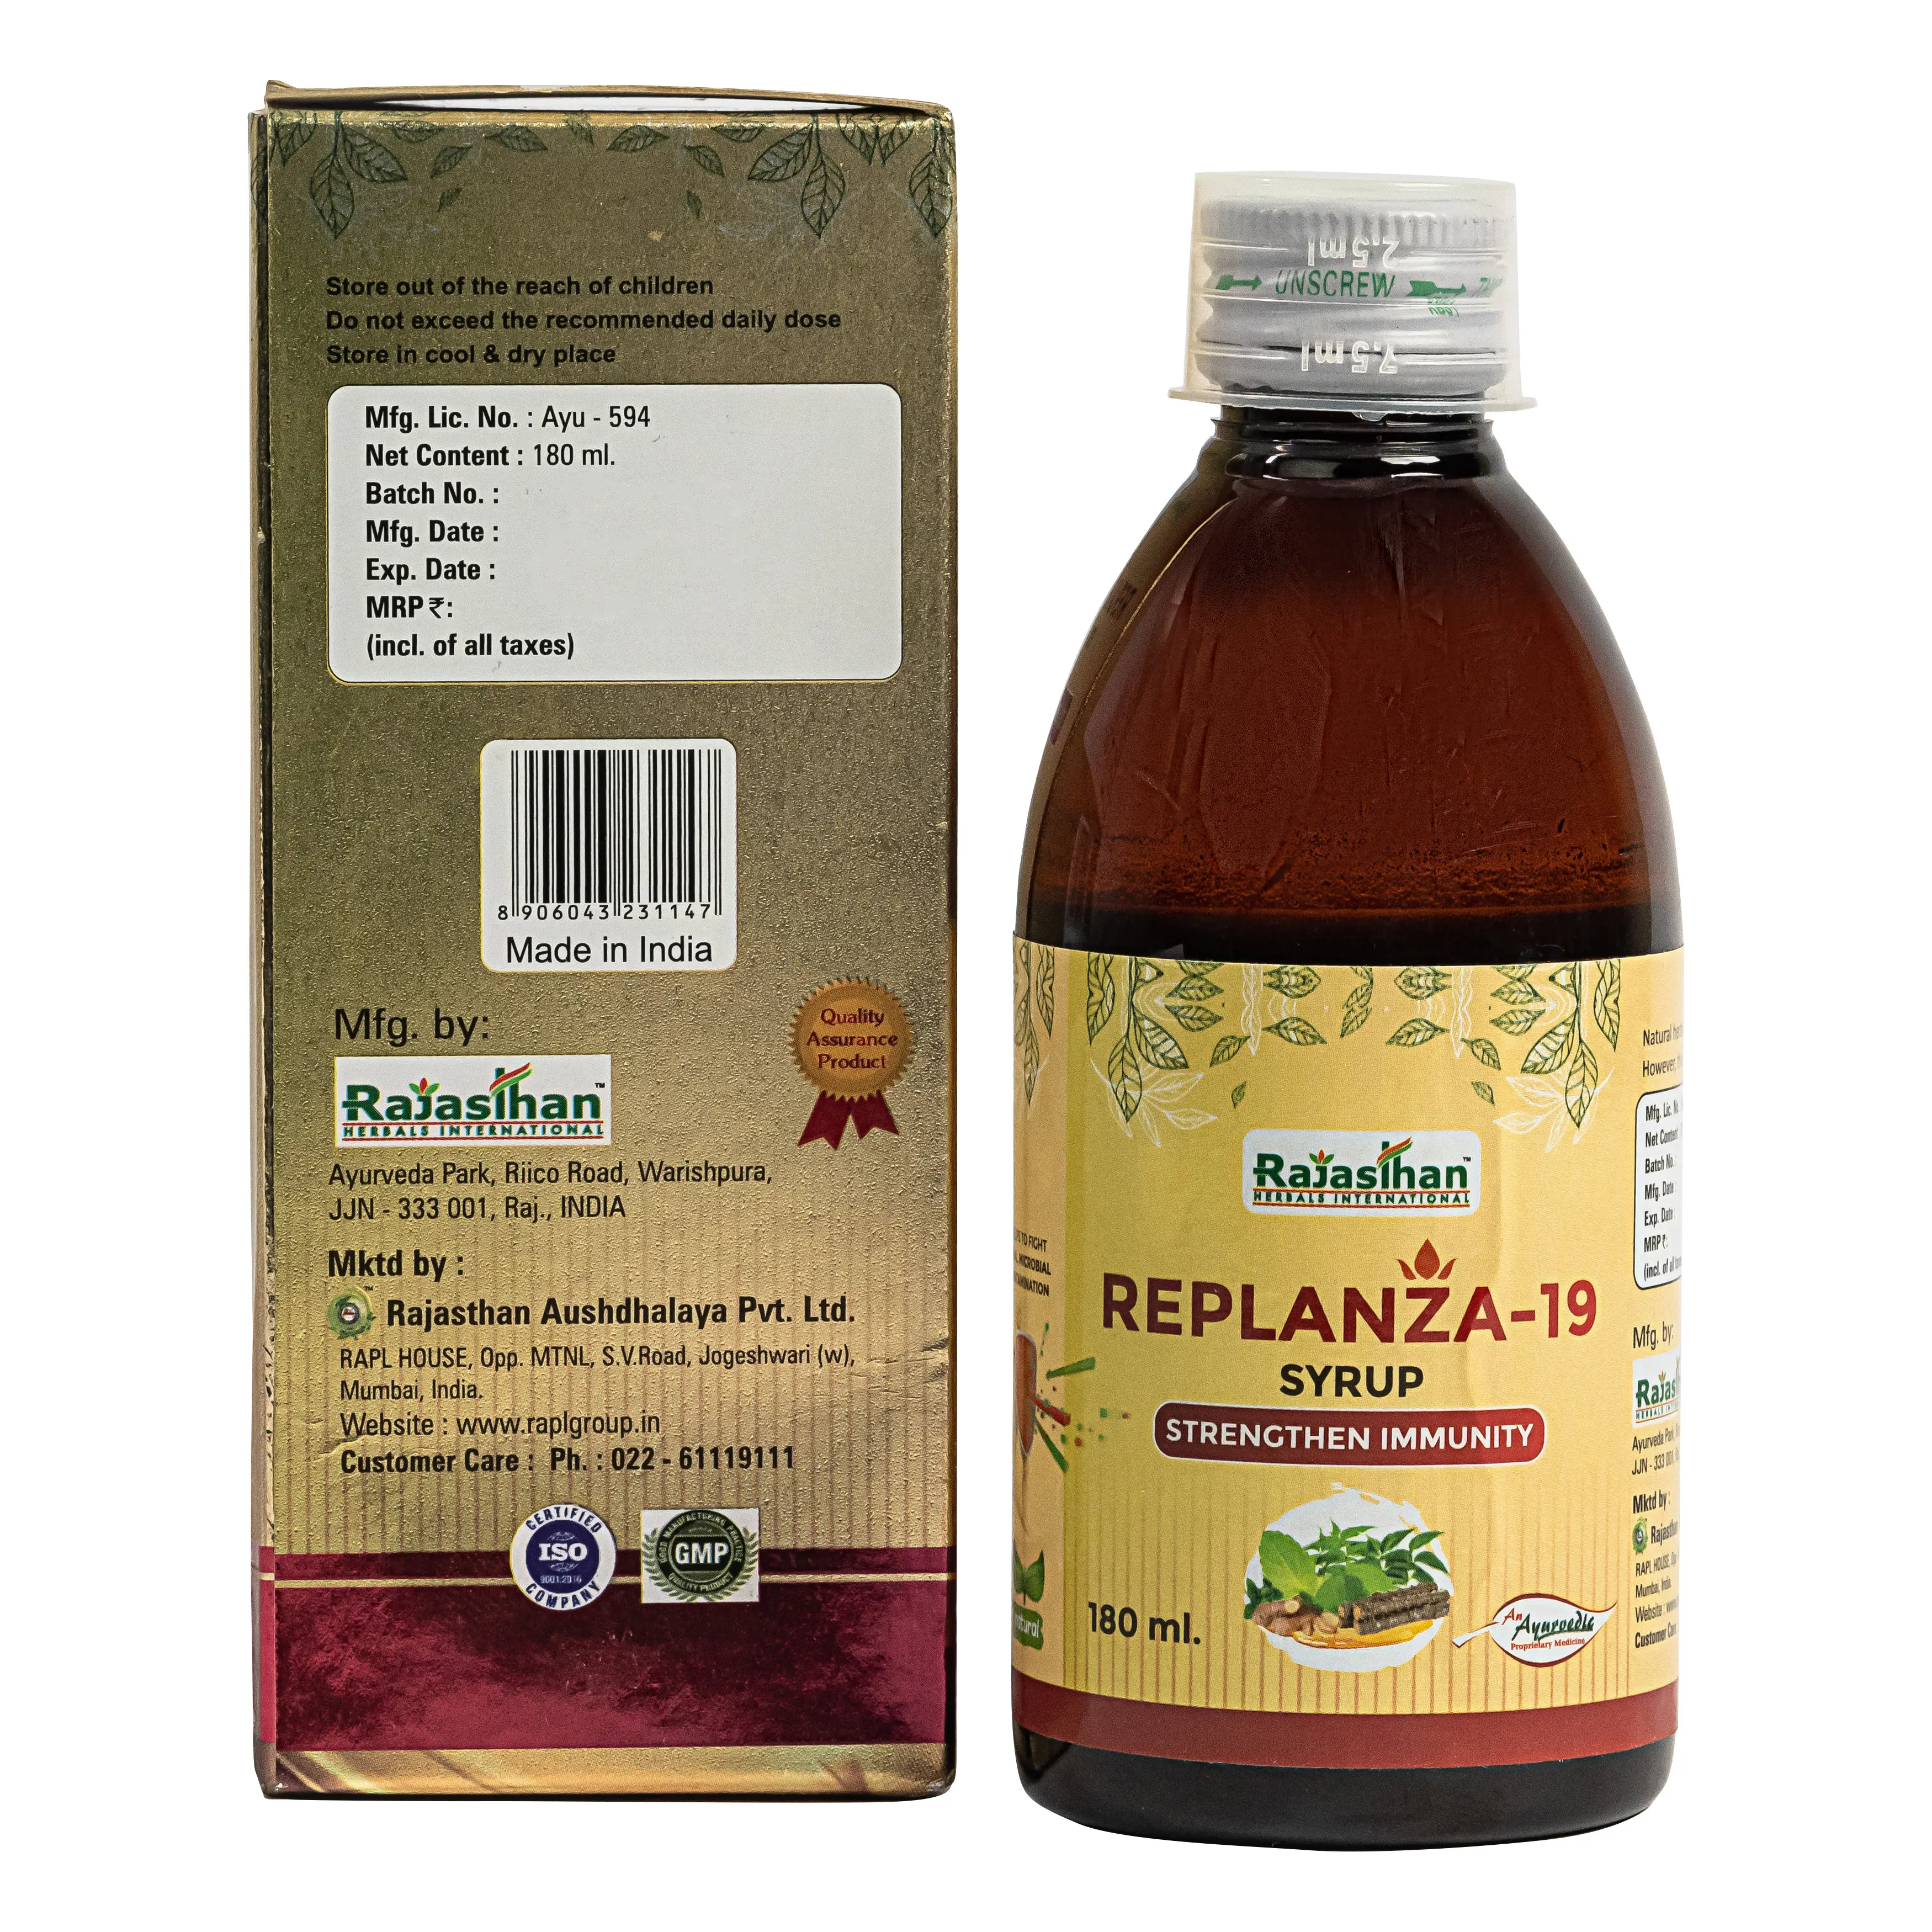 Replanza 19 Syrup